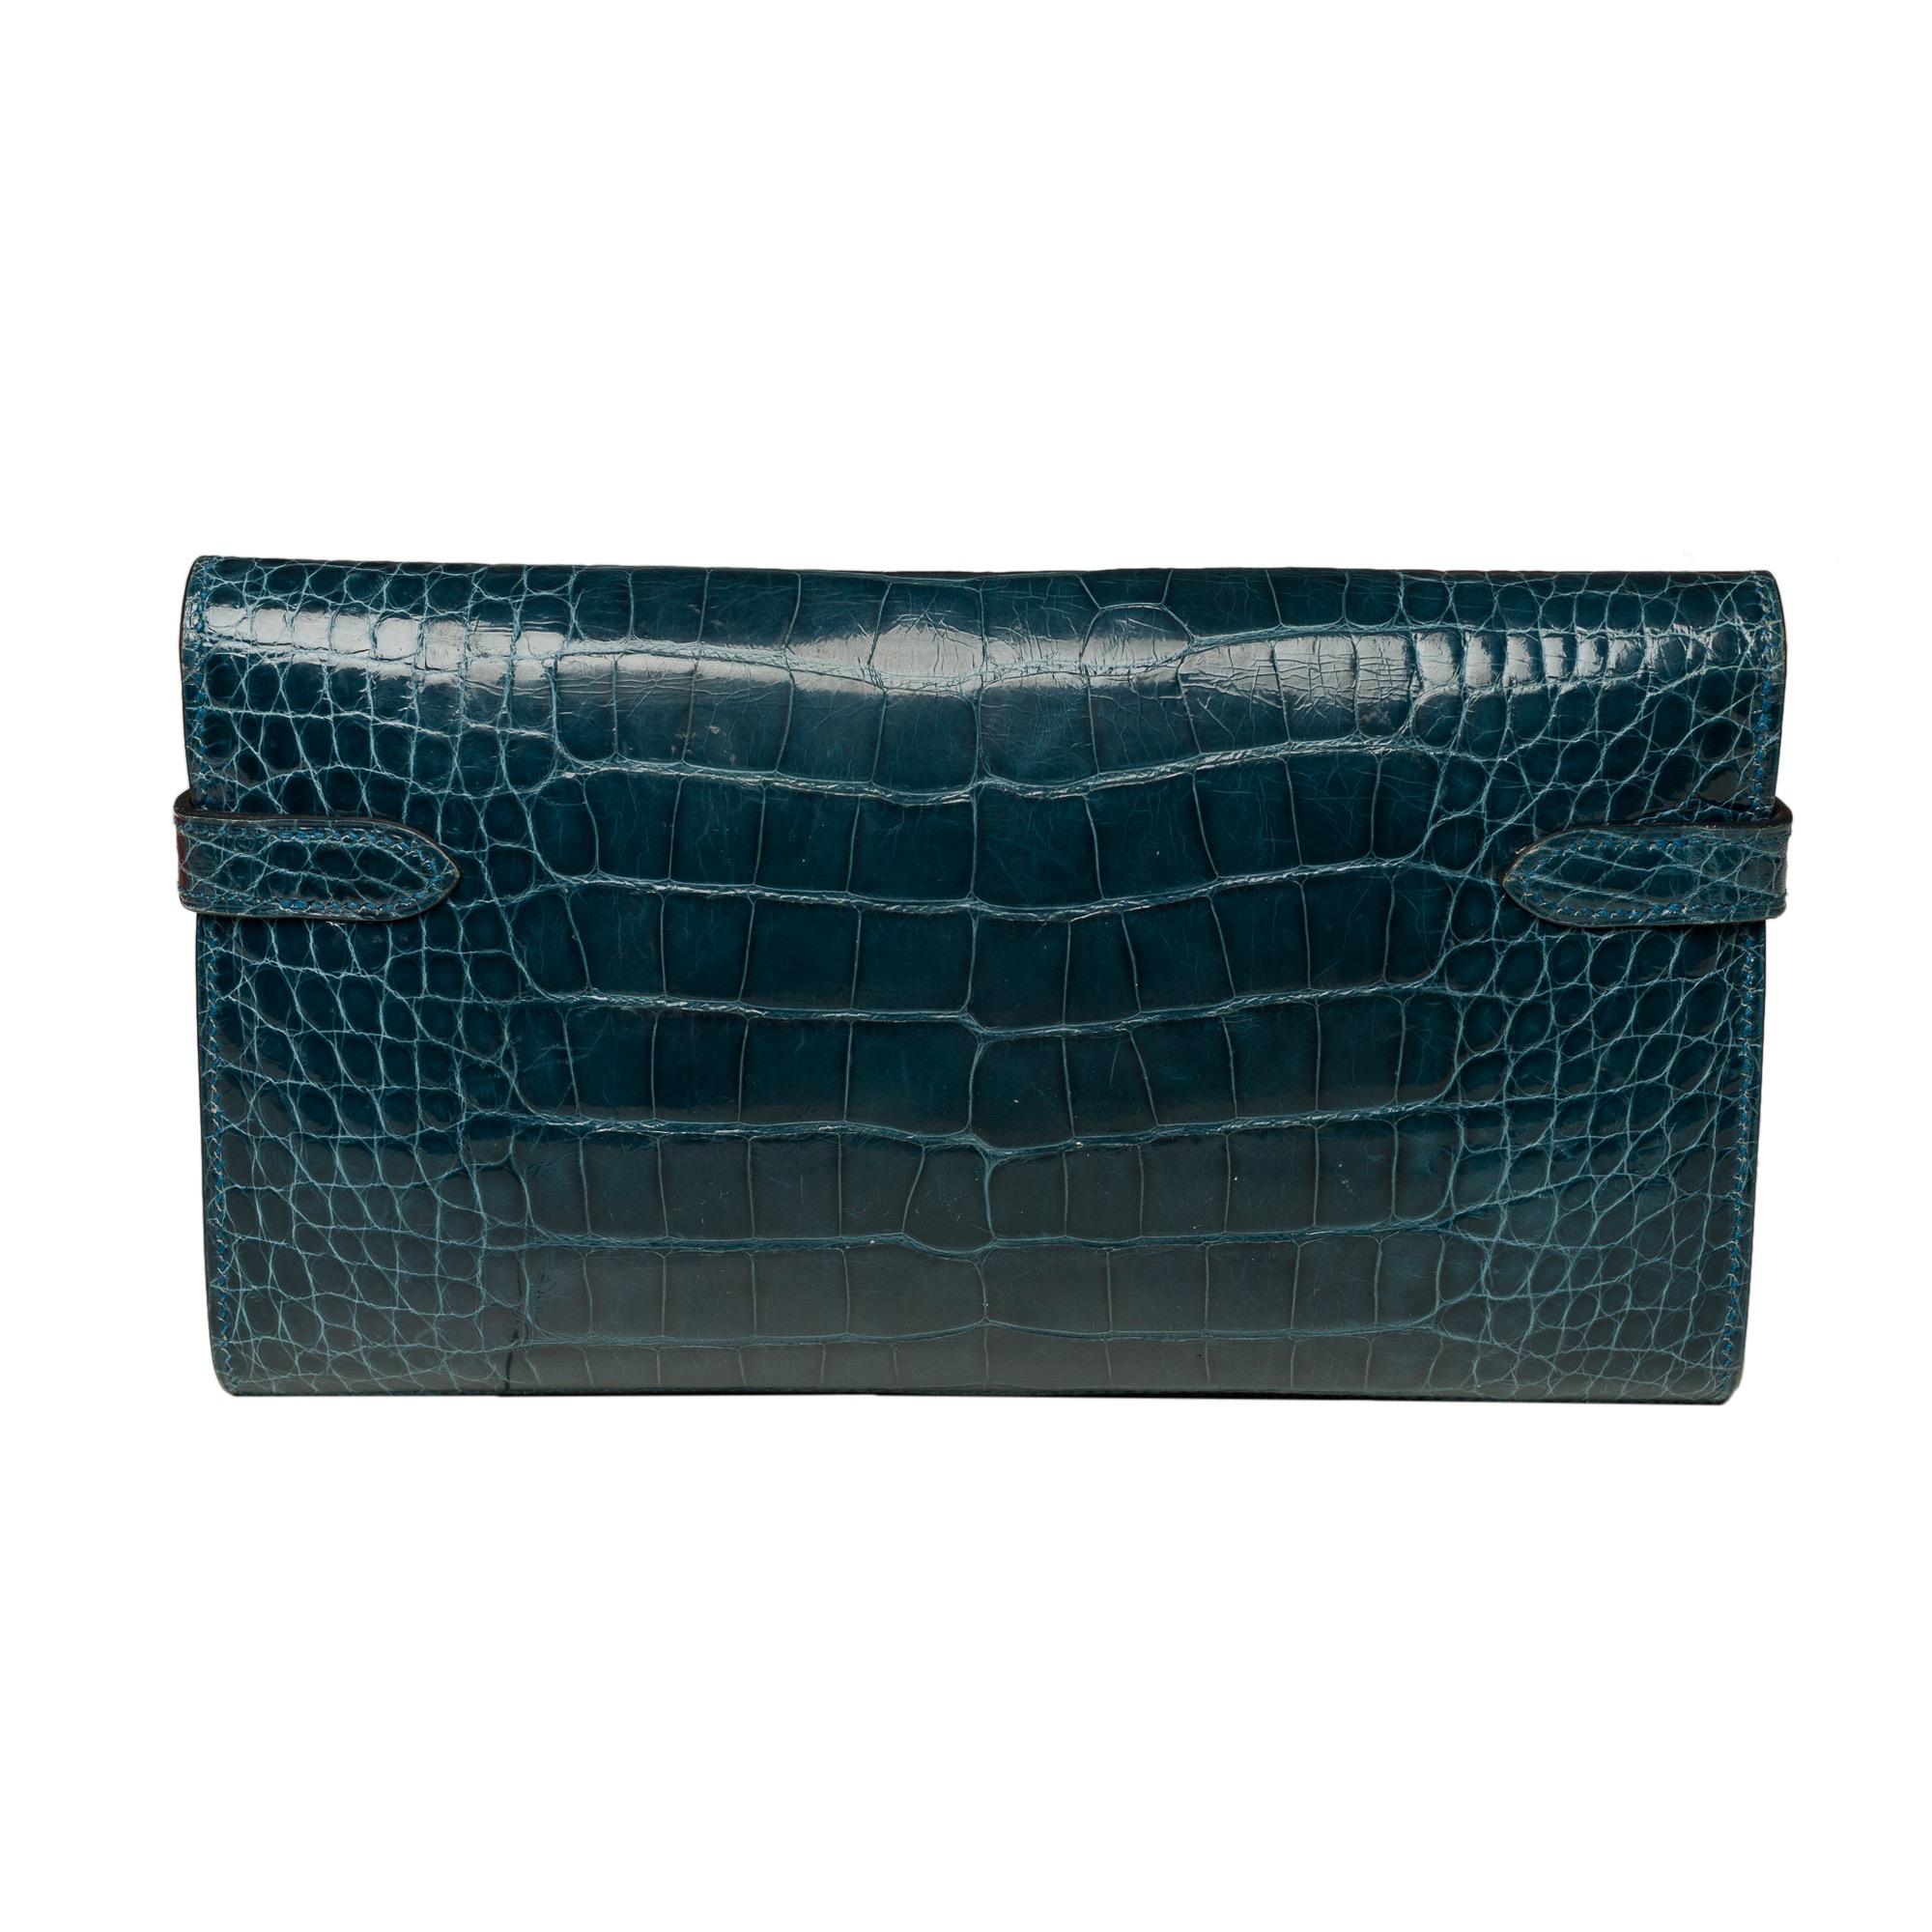 Beautiful Hermès Kelly Wallet in blue colvert alligator, palladium metal hardware, for a hand-carried
Flap closure
Inner lining in colvert blue leather, 3 compartments, one zipped, two patch pockets, 12 card slots
Signature: 